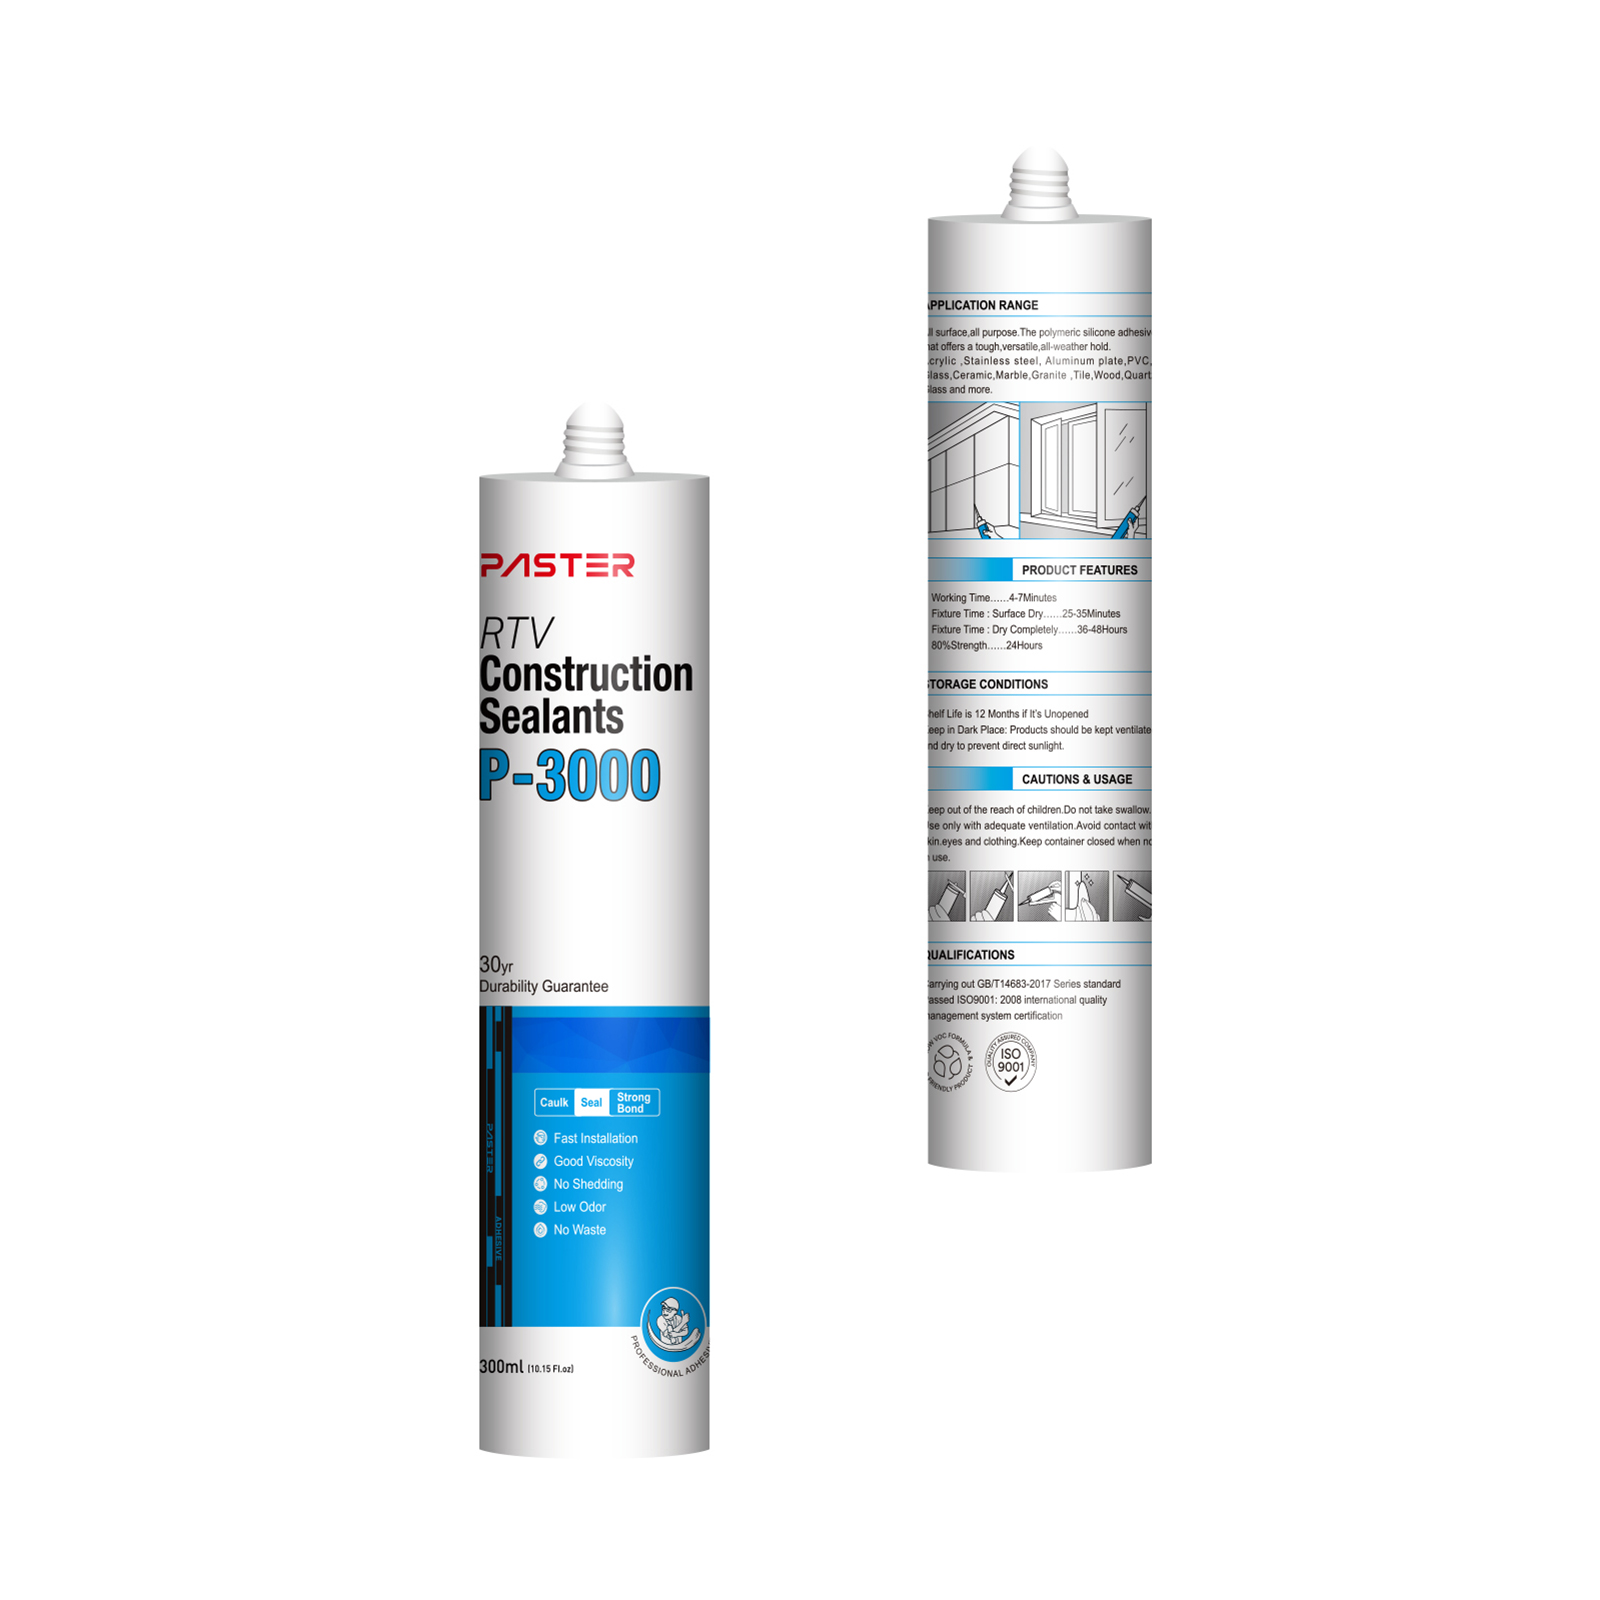 Sample-P-3000A Polymeric adhesive RTV Construction Sealants for Signage